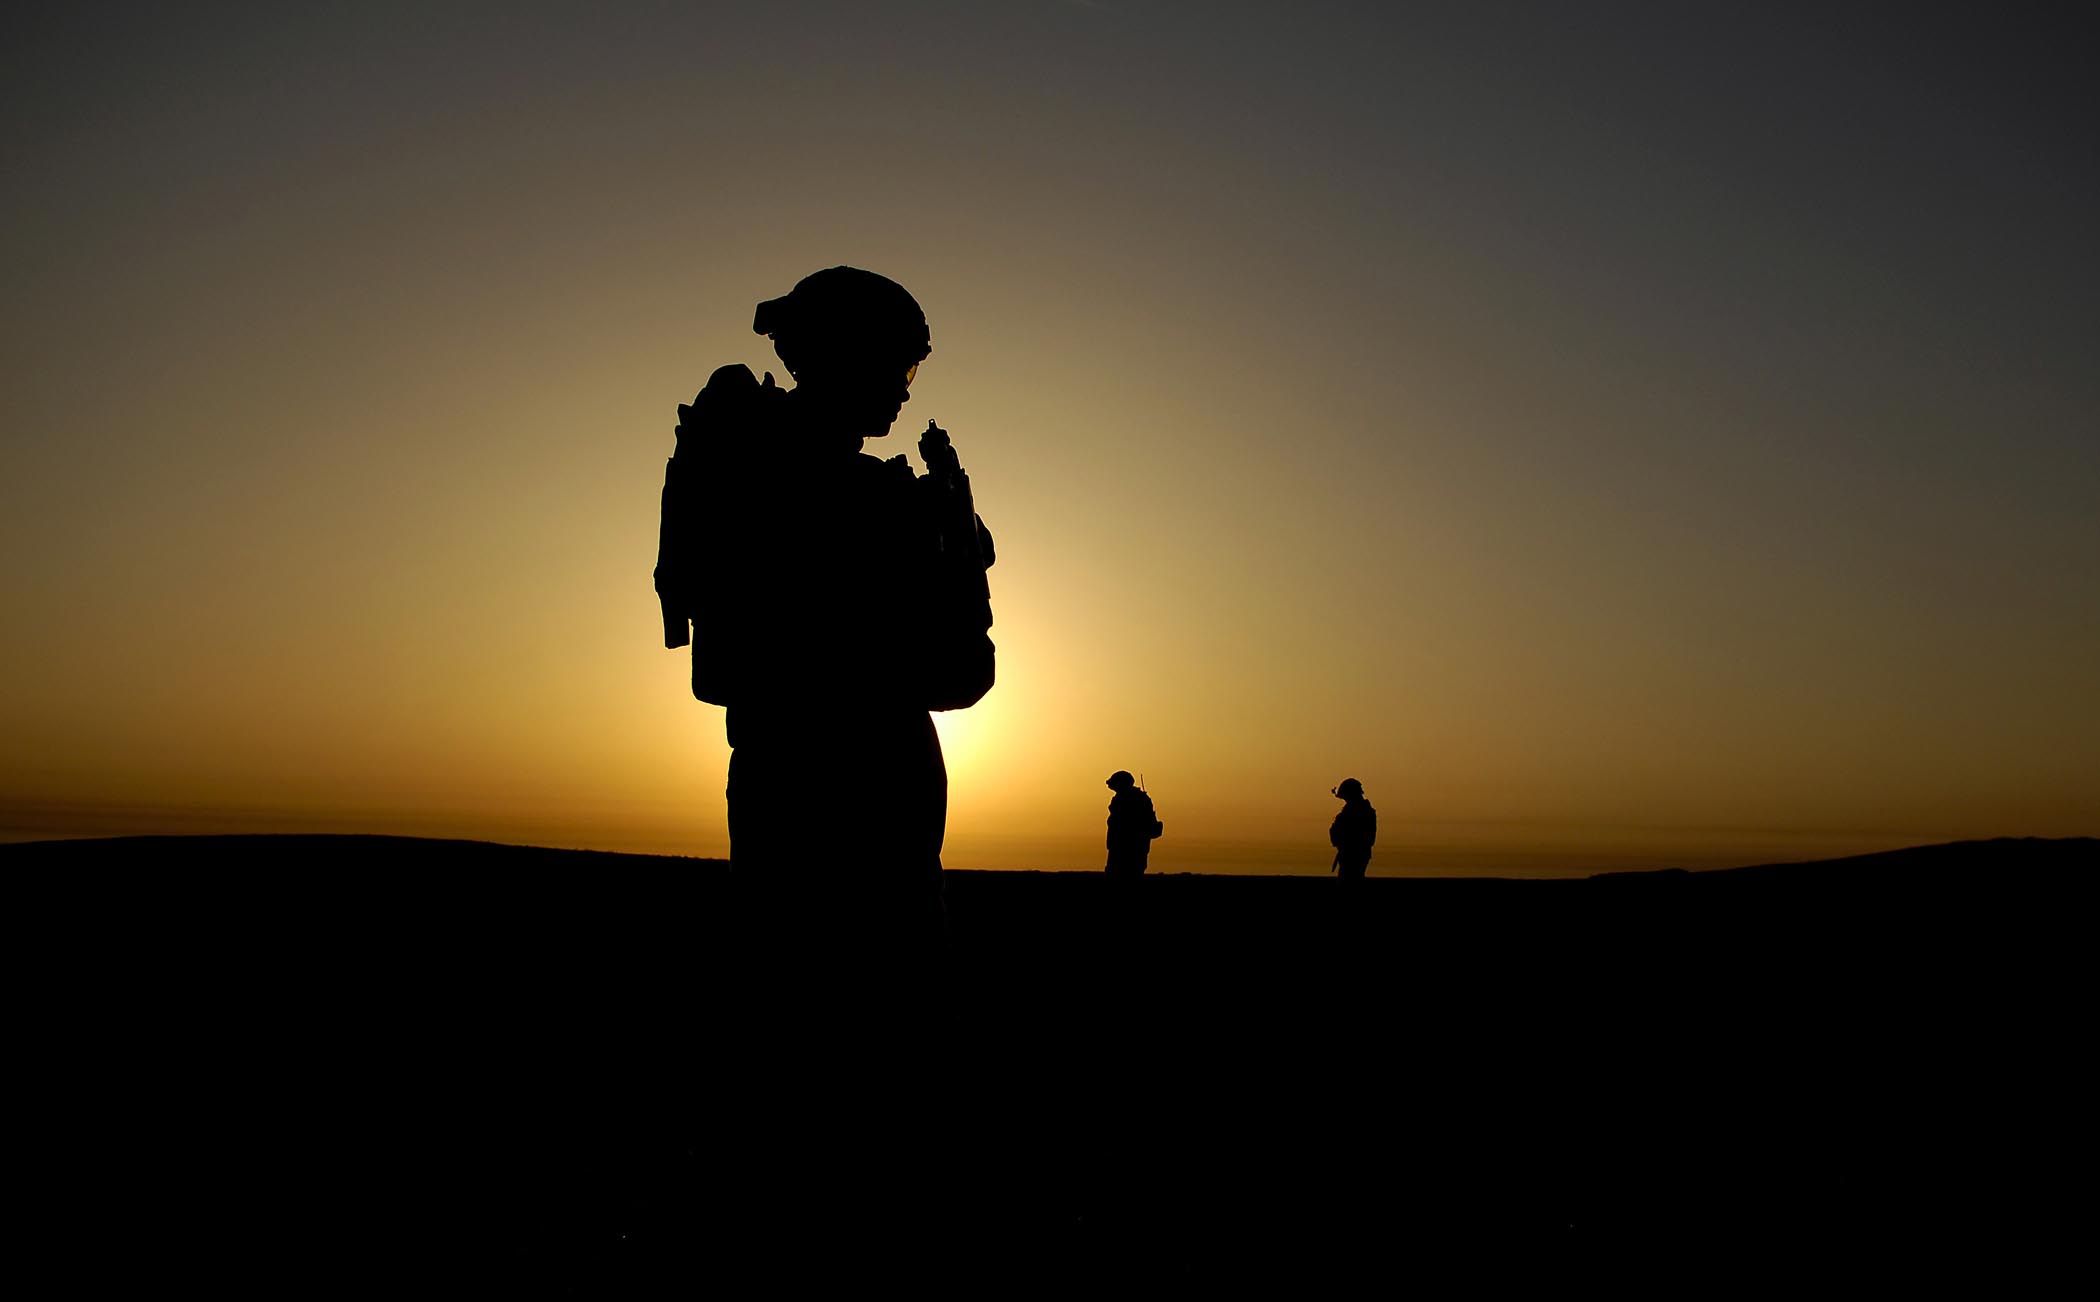 File:U.S. Army Soldier silhouette on mission in Iraq.jpg 